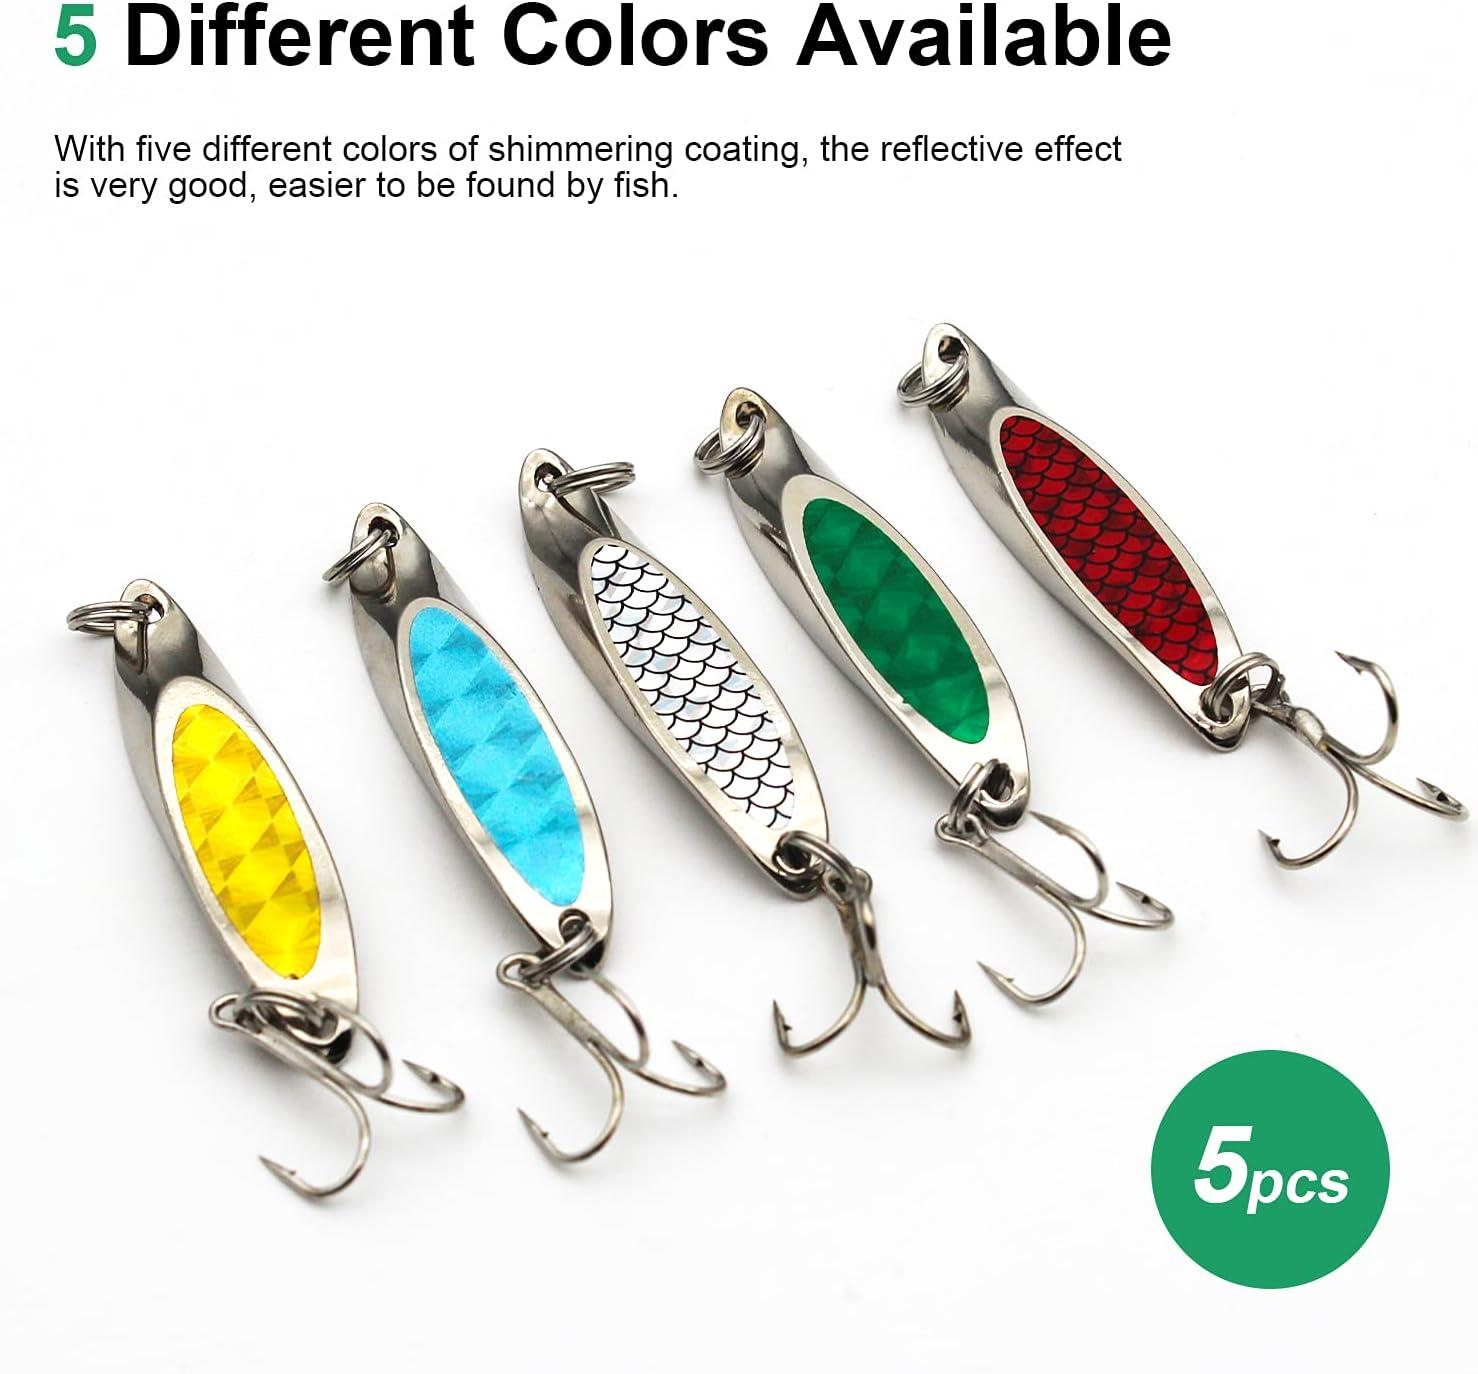 Metal Fish with Hooks for Fishing Lures